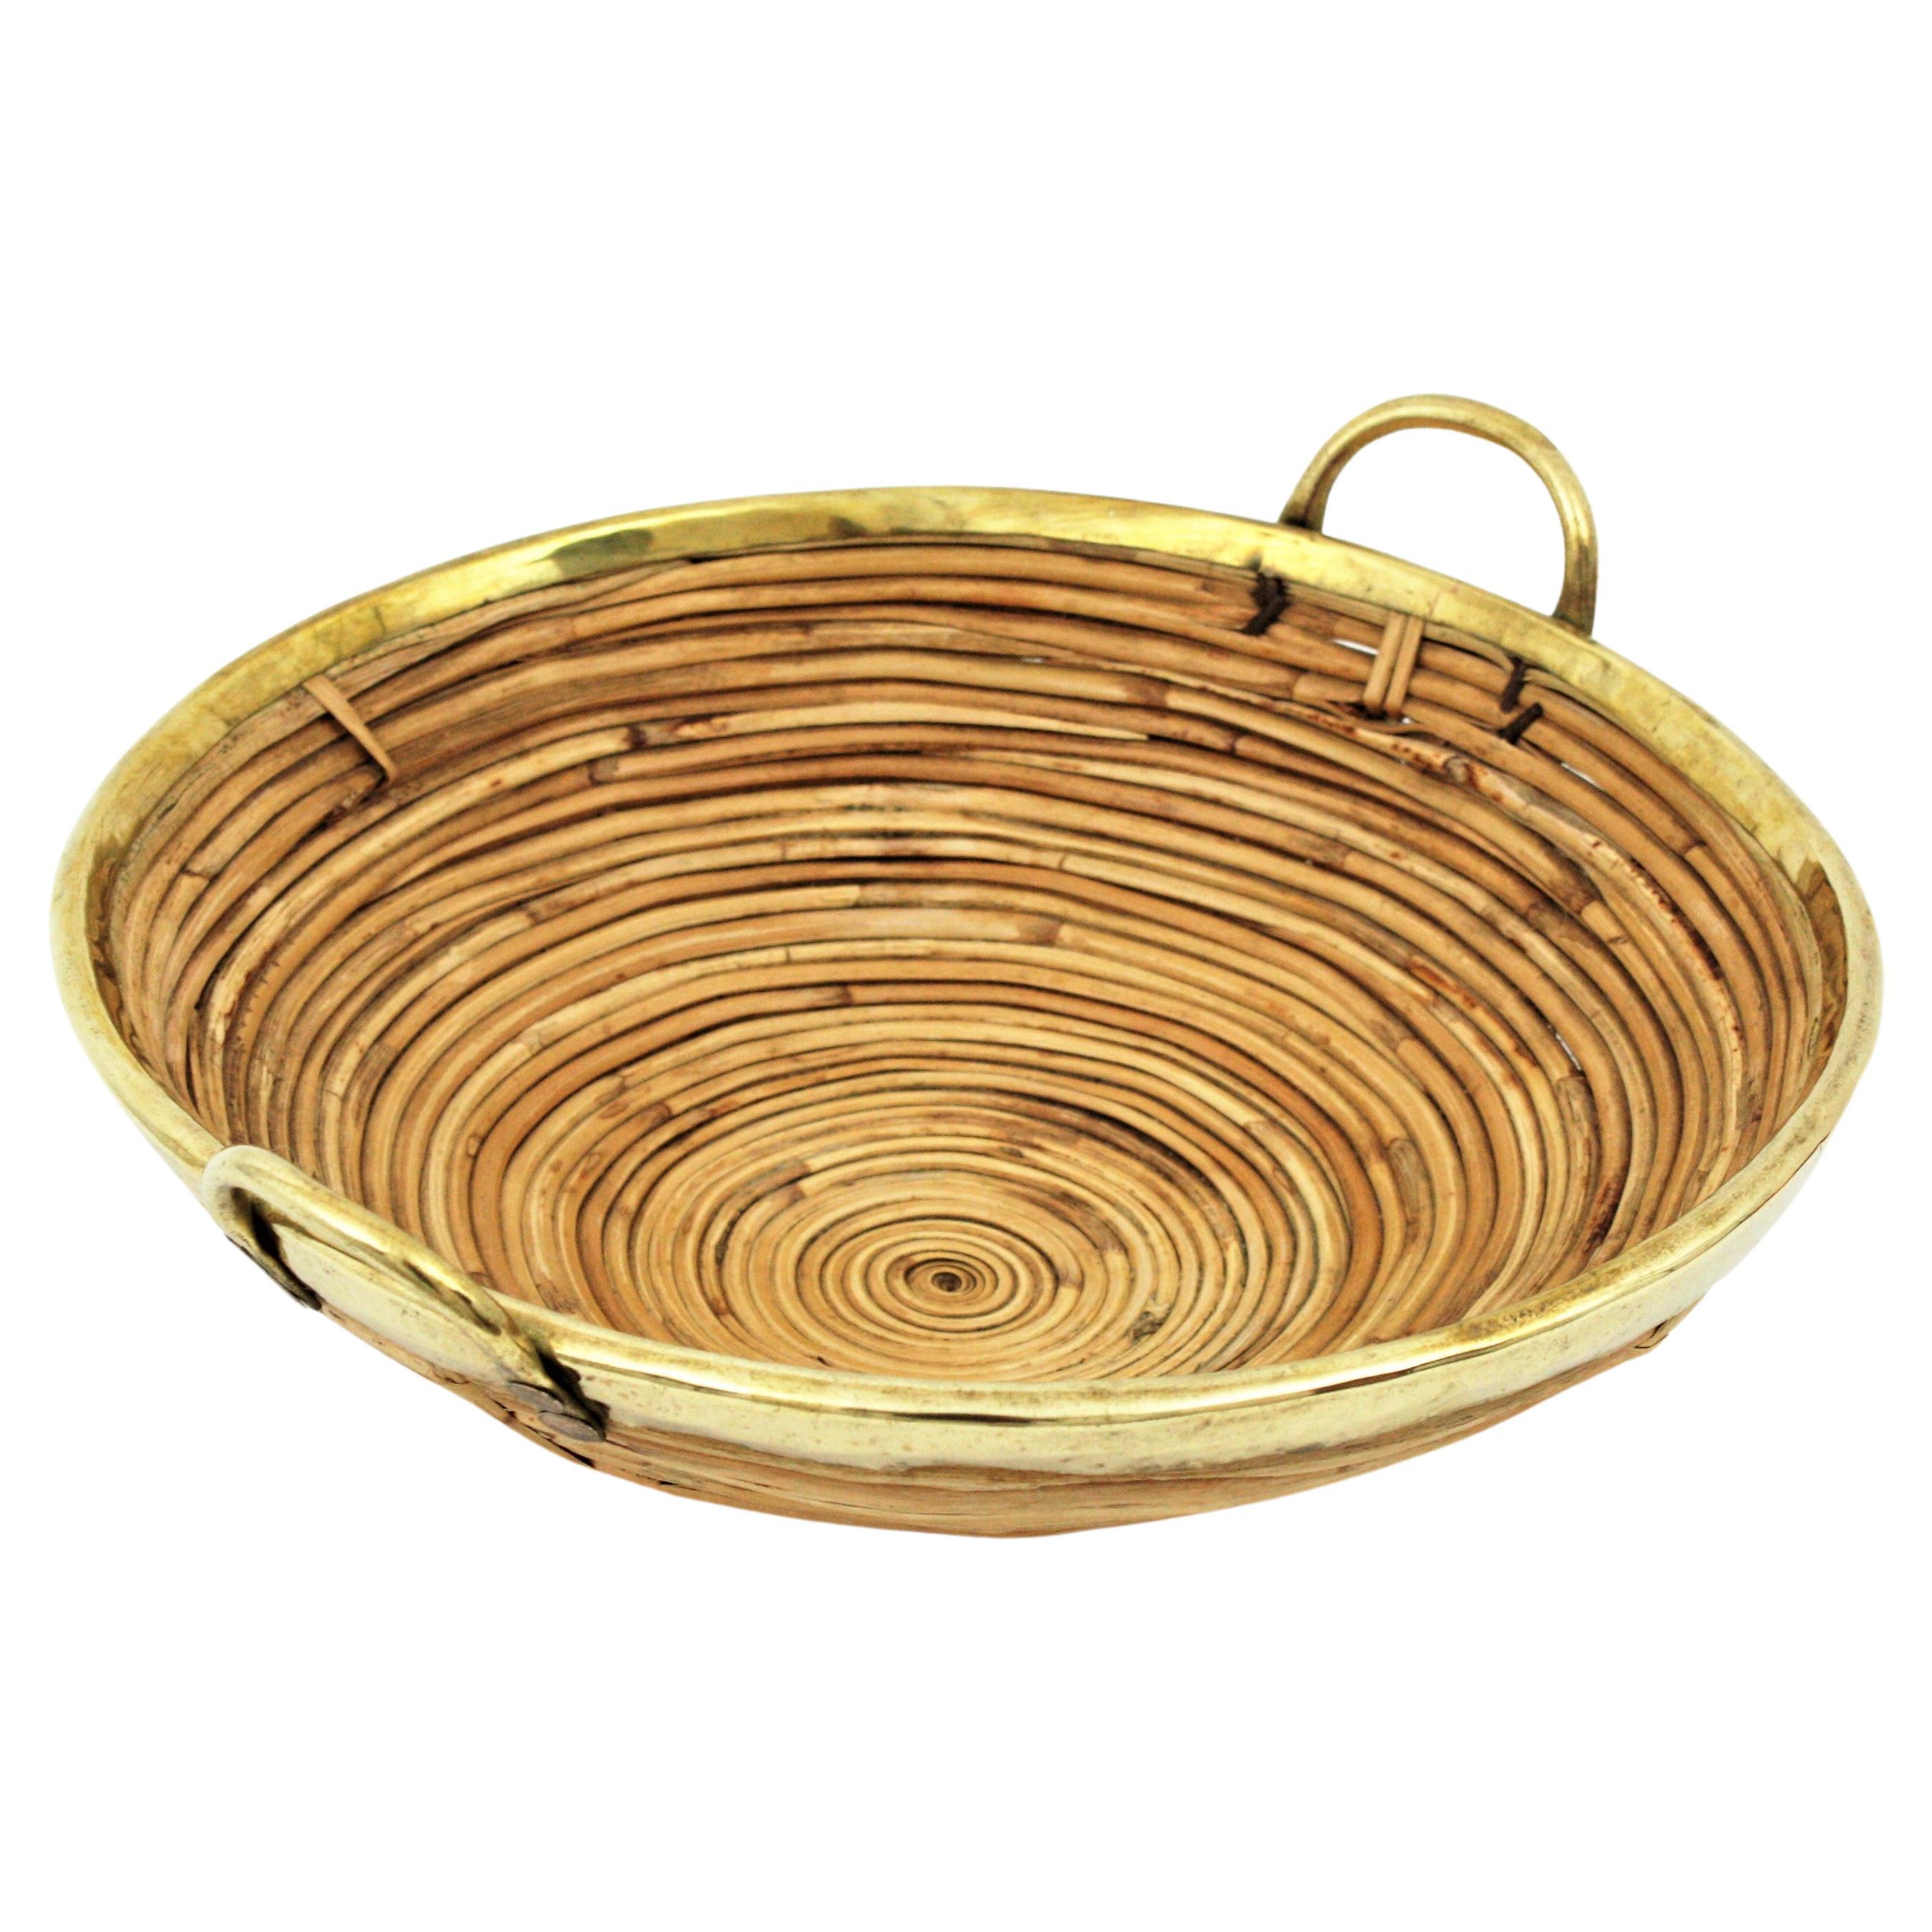 Rattan and Brass Italian Centerpiece Basket with Handles, 1970s